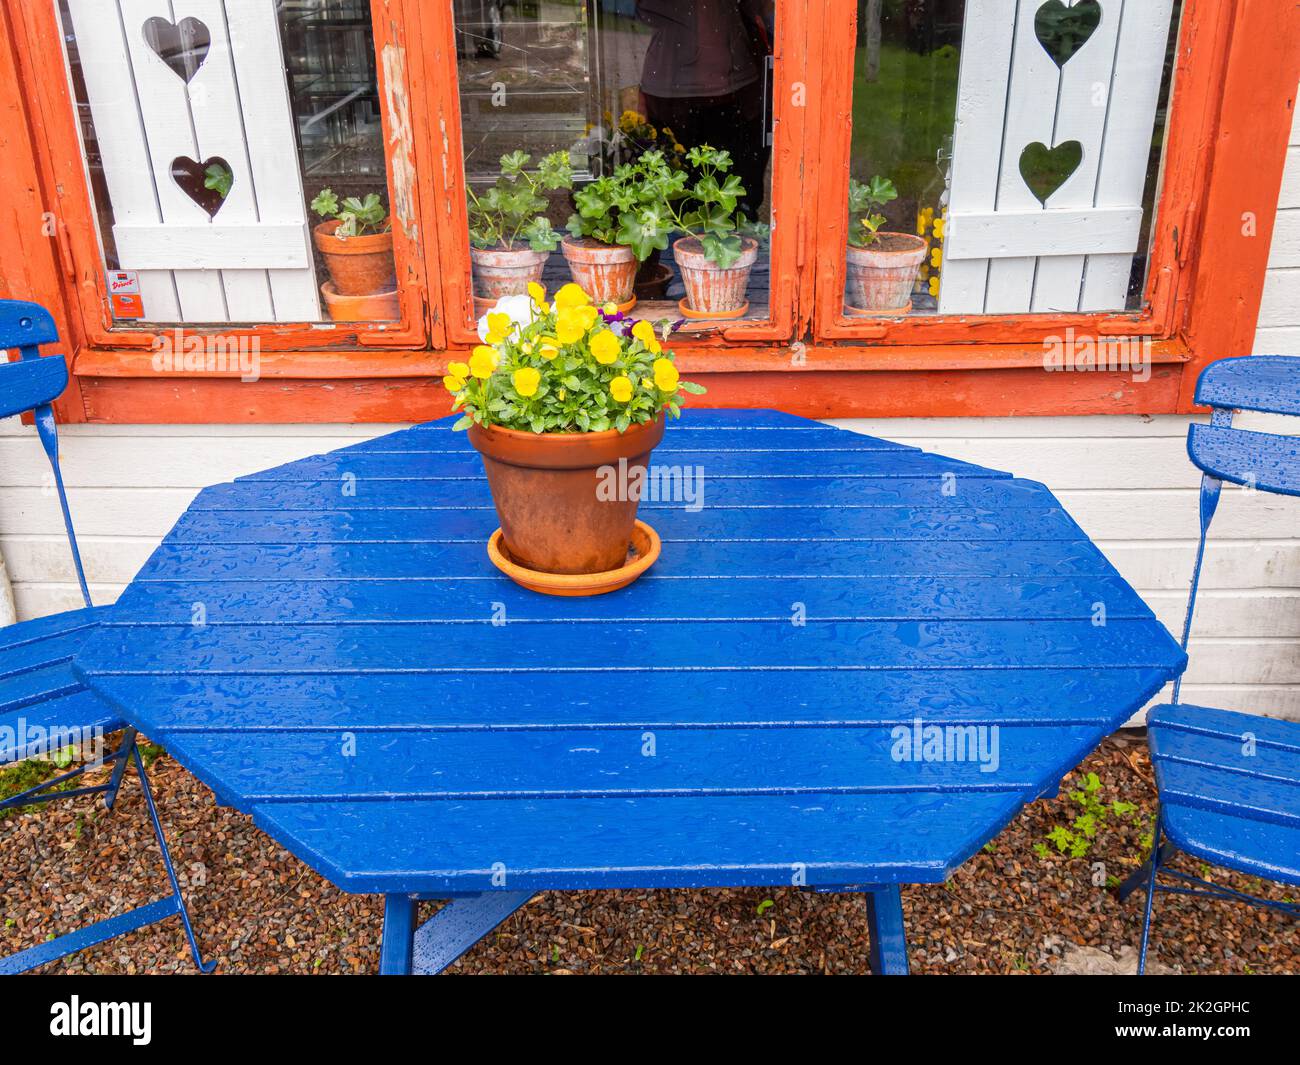 Angelsberg, Sweden - May 28, 2022: Blue table in front of the old cottage with white window shutter in the background Stock Photo